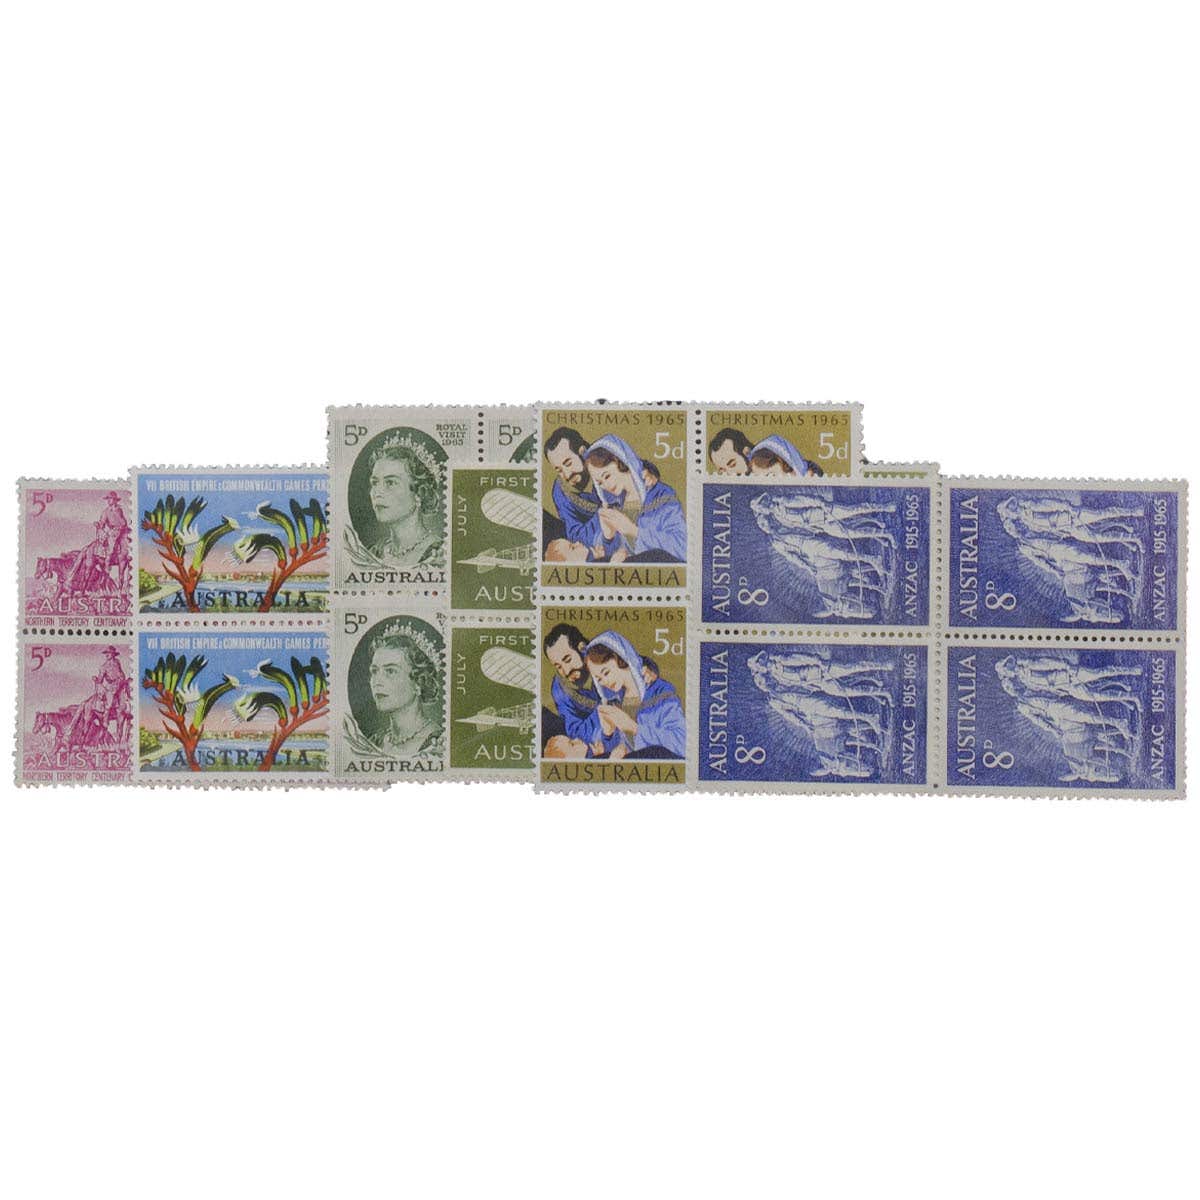 1953-65 Set of 25 Different Blocks of Four (100 stamps) Mint Unhinged